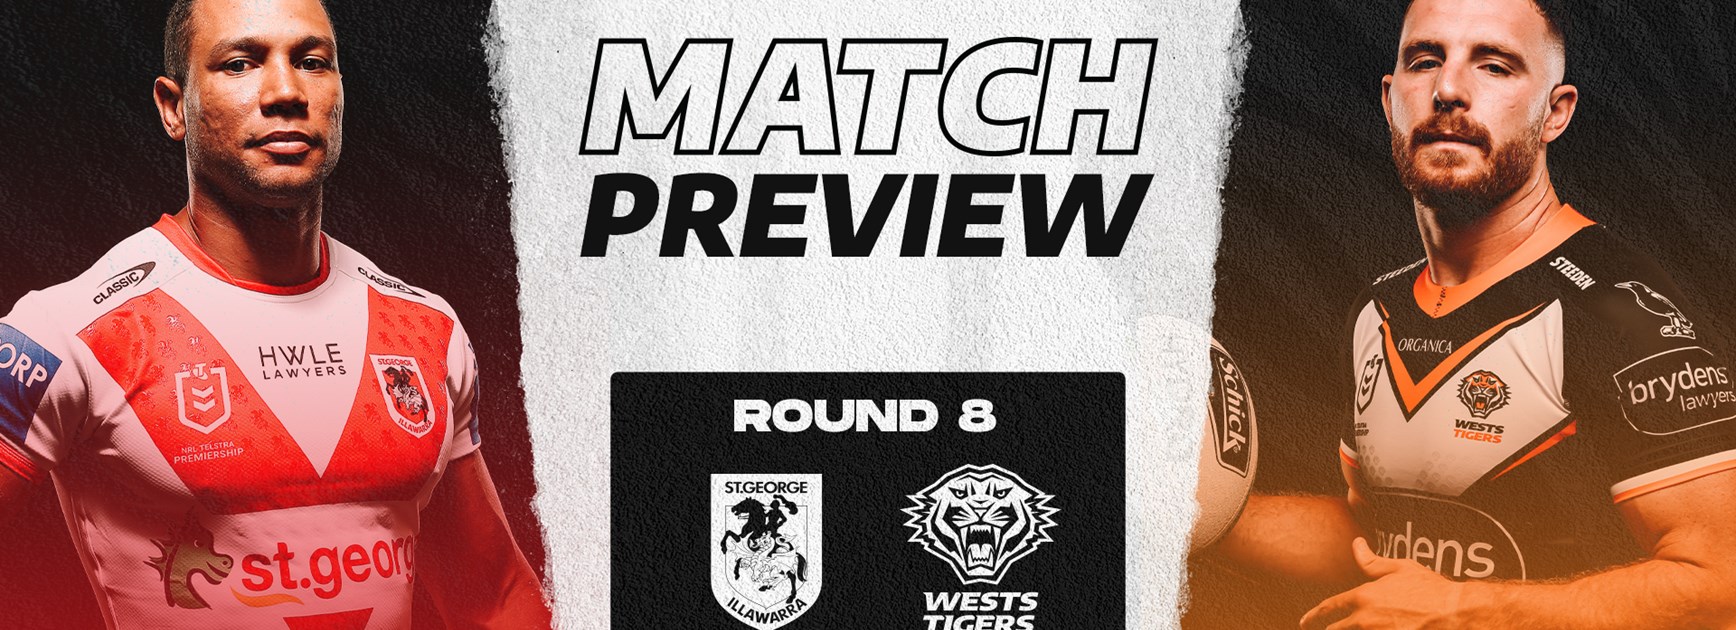 Match Preview: Round 8 vs Dragons